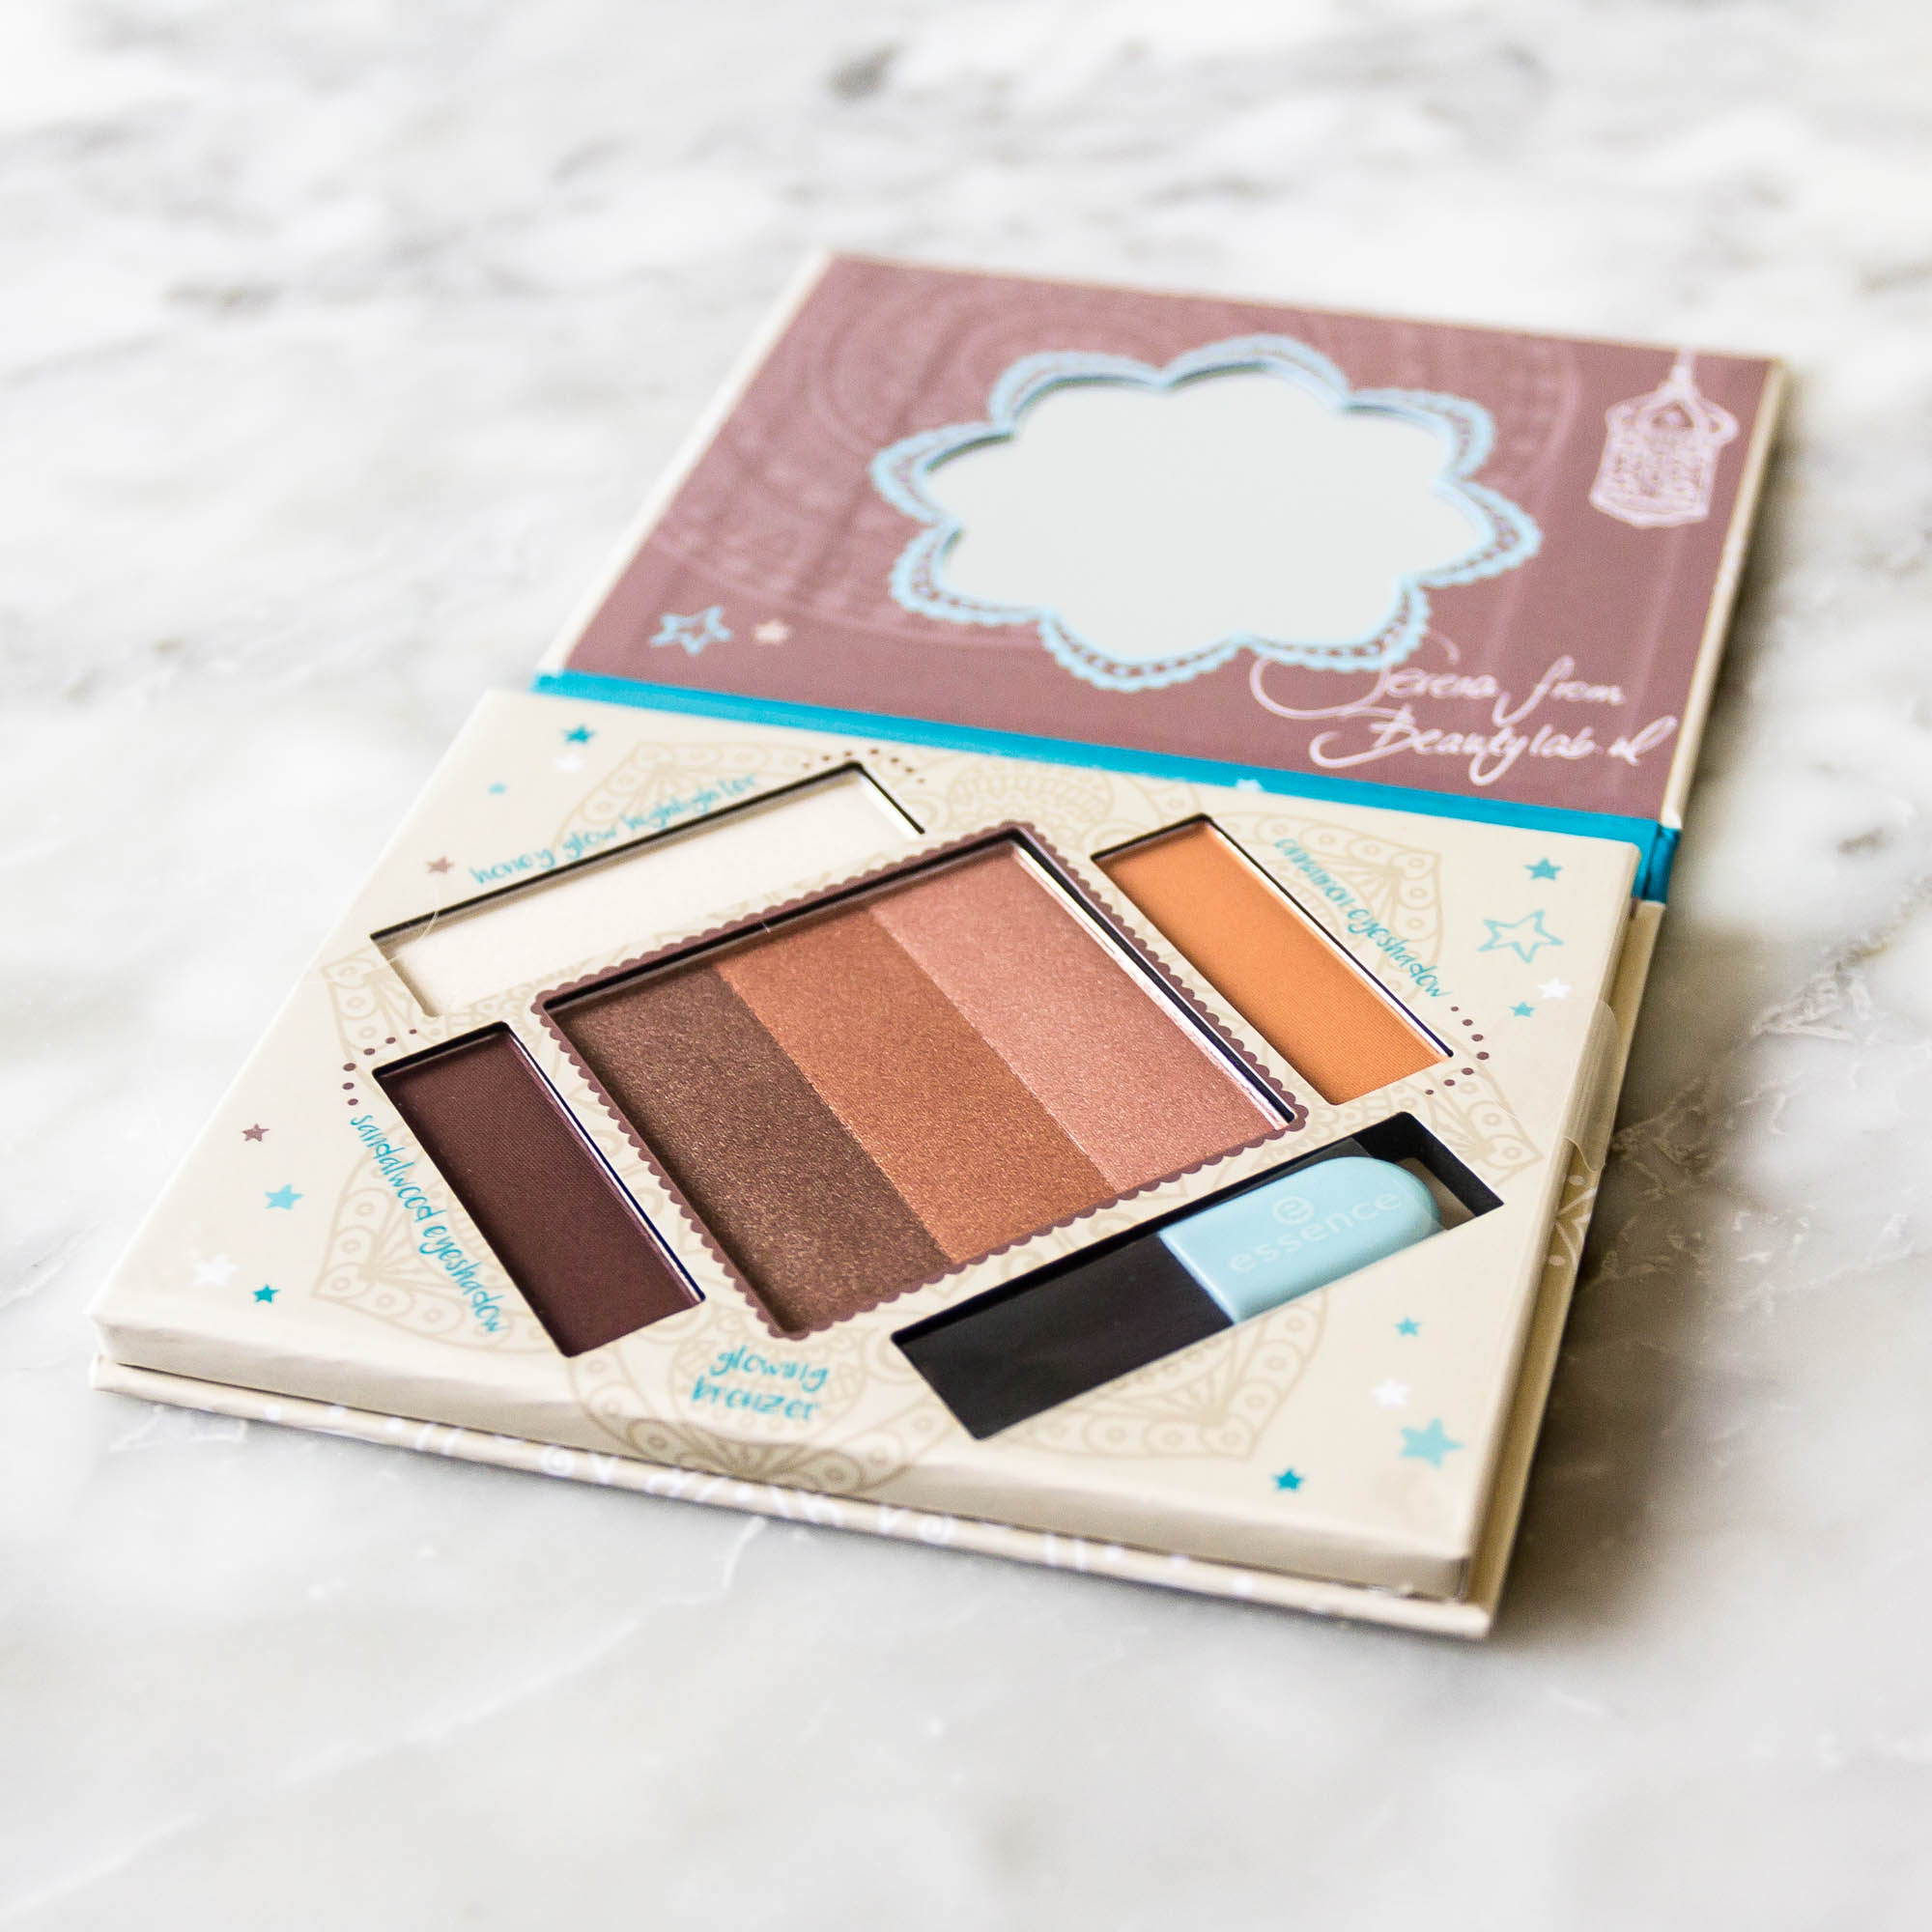 essence cosmetics the glow must go on bronzing and highlighting palette